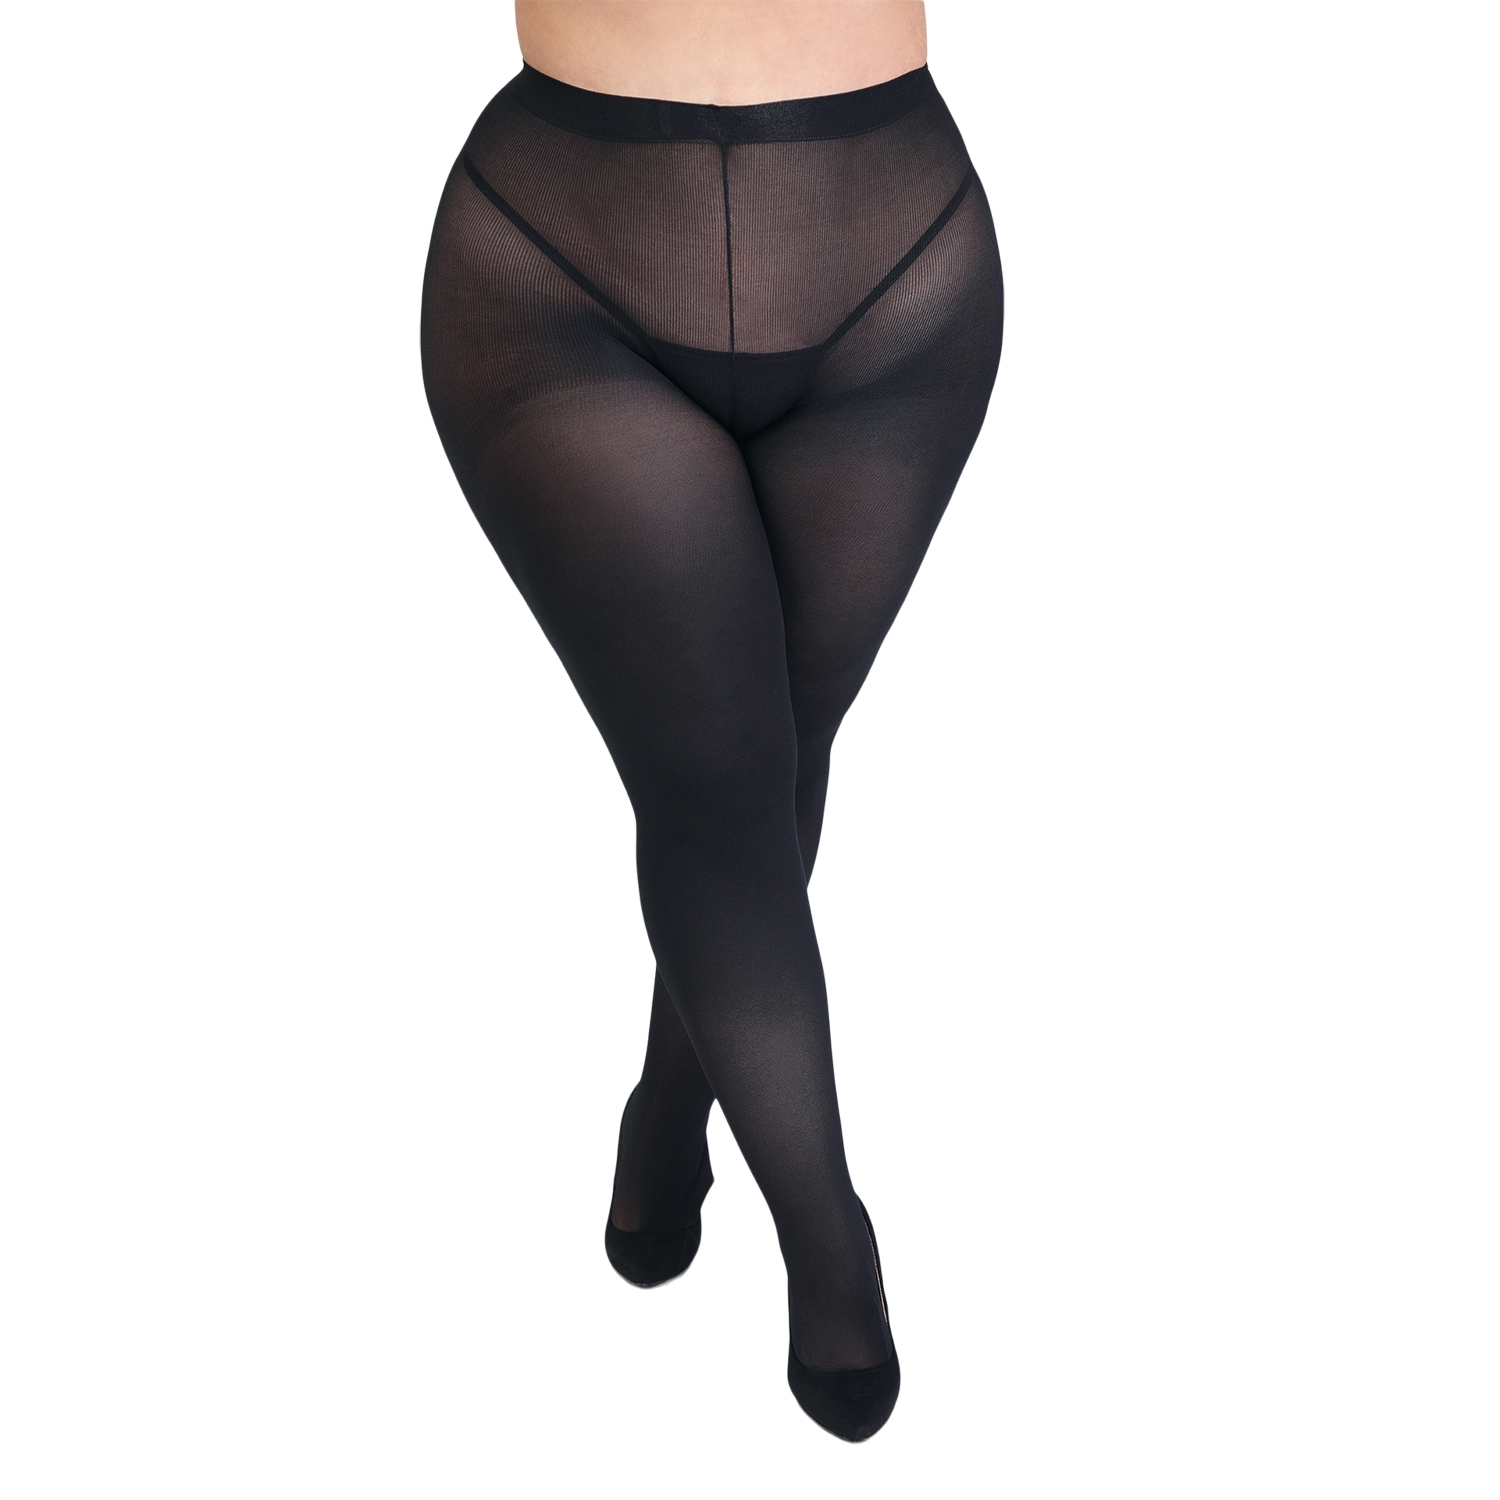 Fifty Shades of Grey Captivate Plus Size Spanking Tights     - Sort - One Size Queen thumbnail